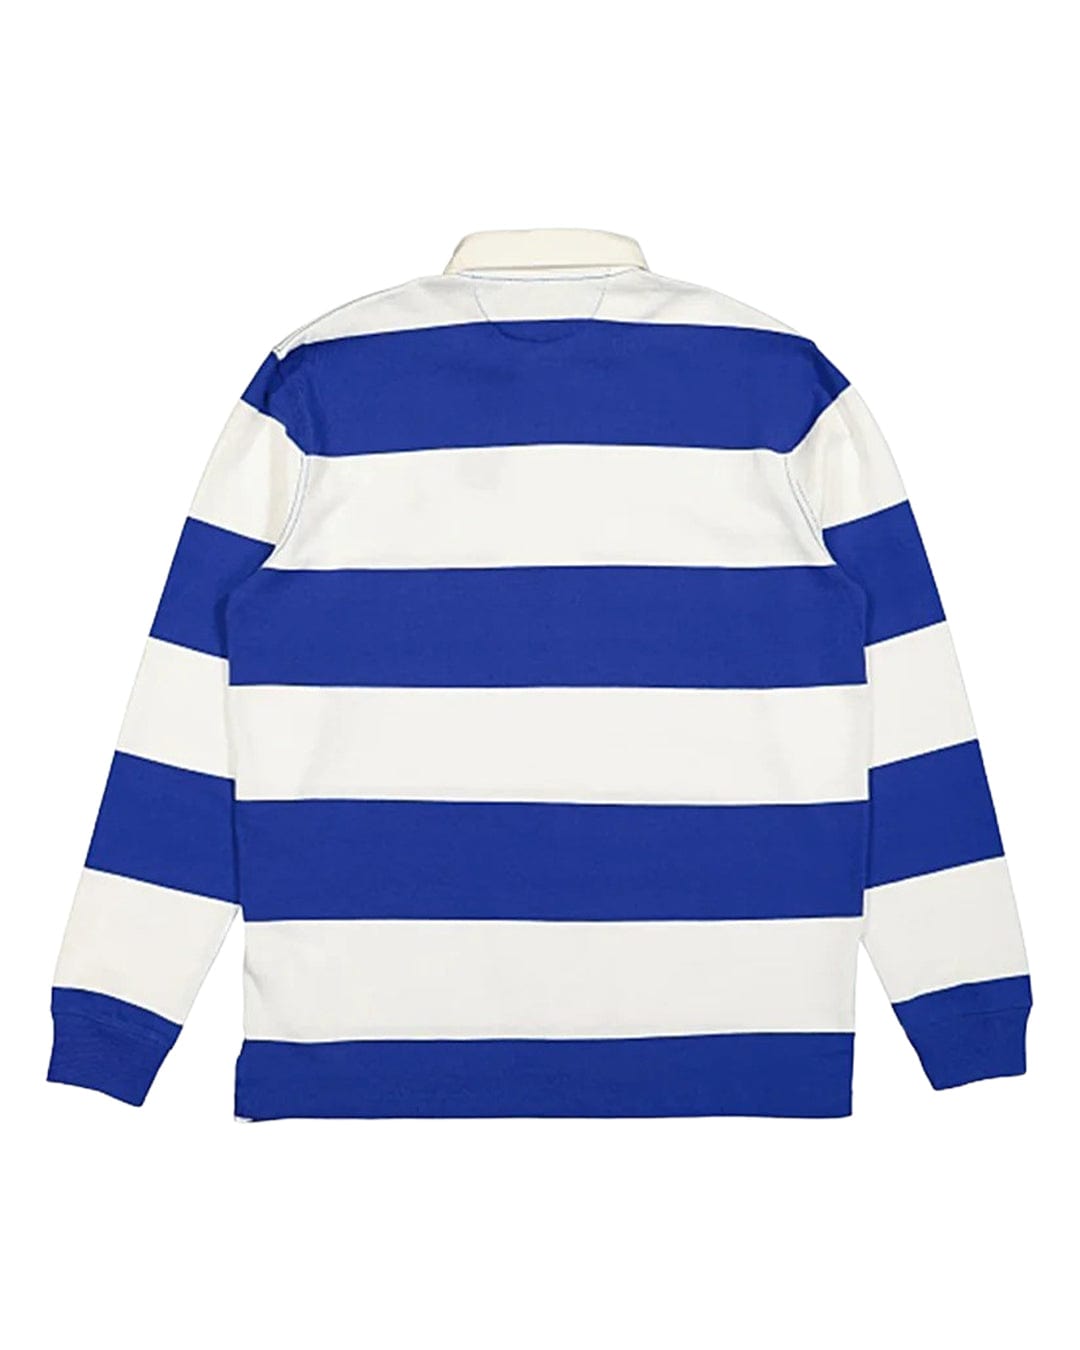 Polo Ralph Lauren Polo Shirts Polo Ralph Lauren Blue And White Striped Rugby Polo Shirt